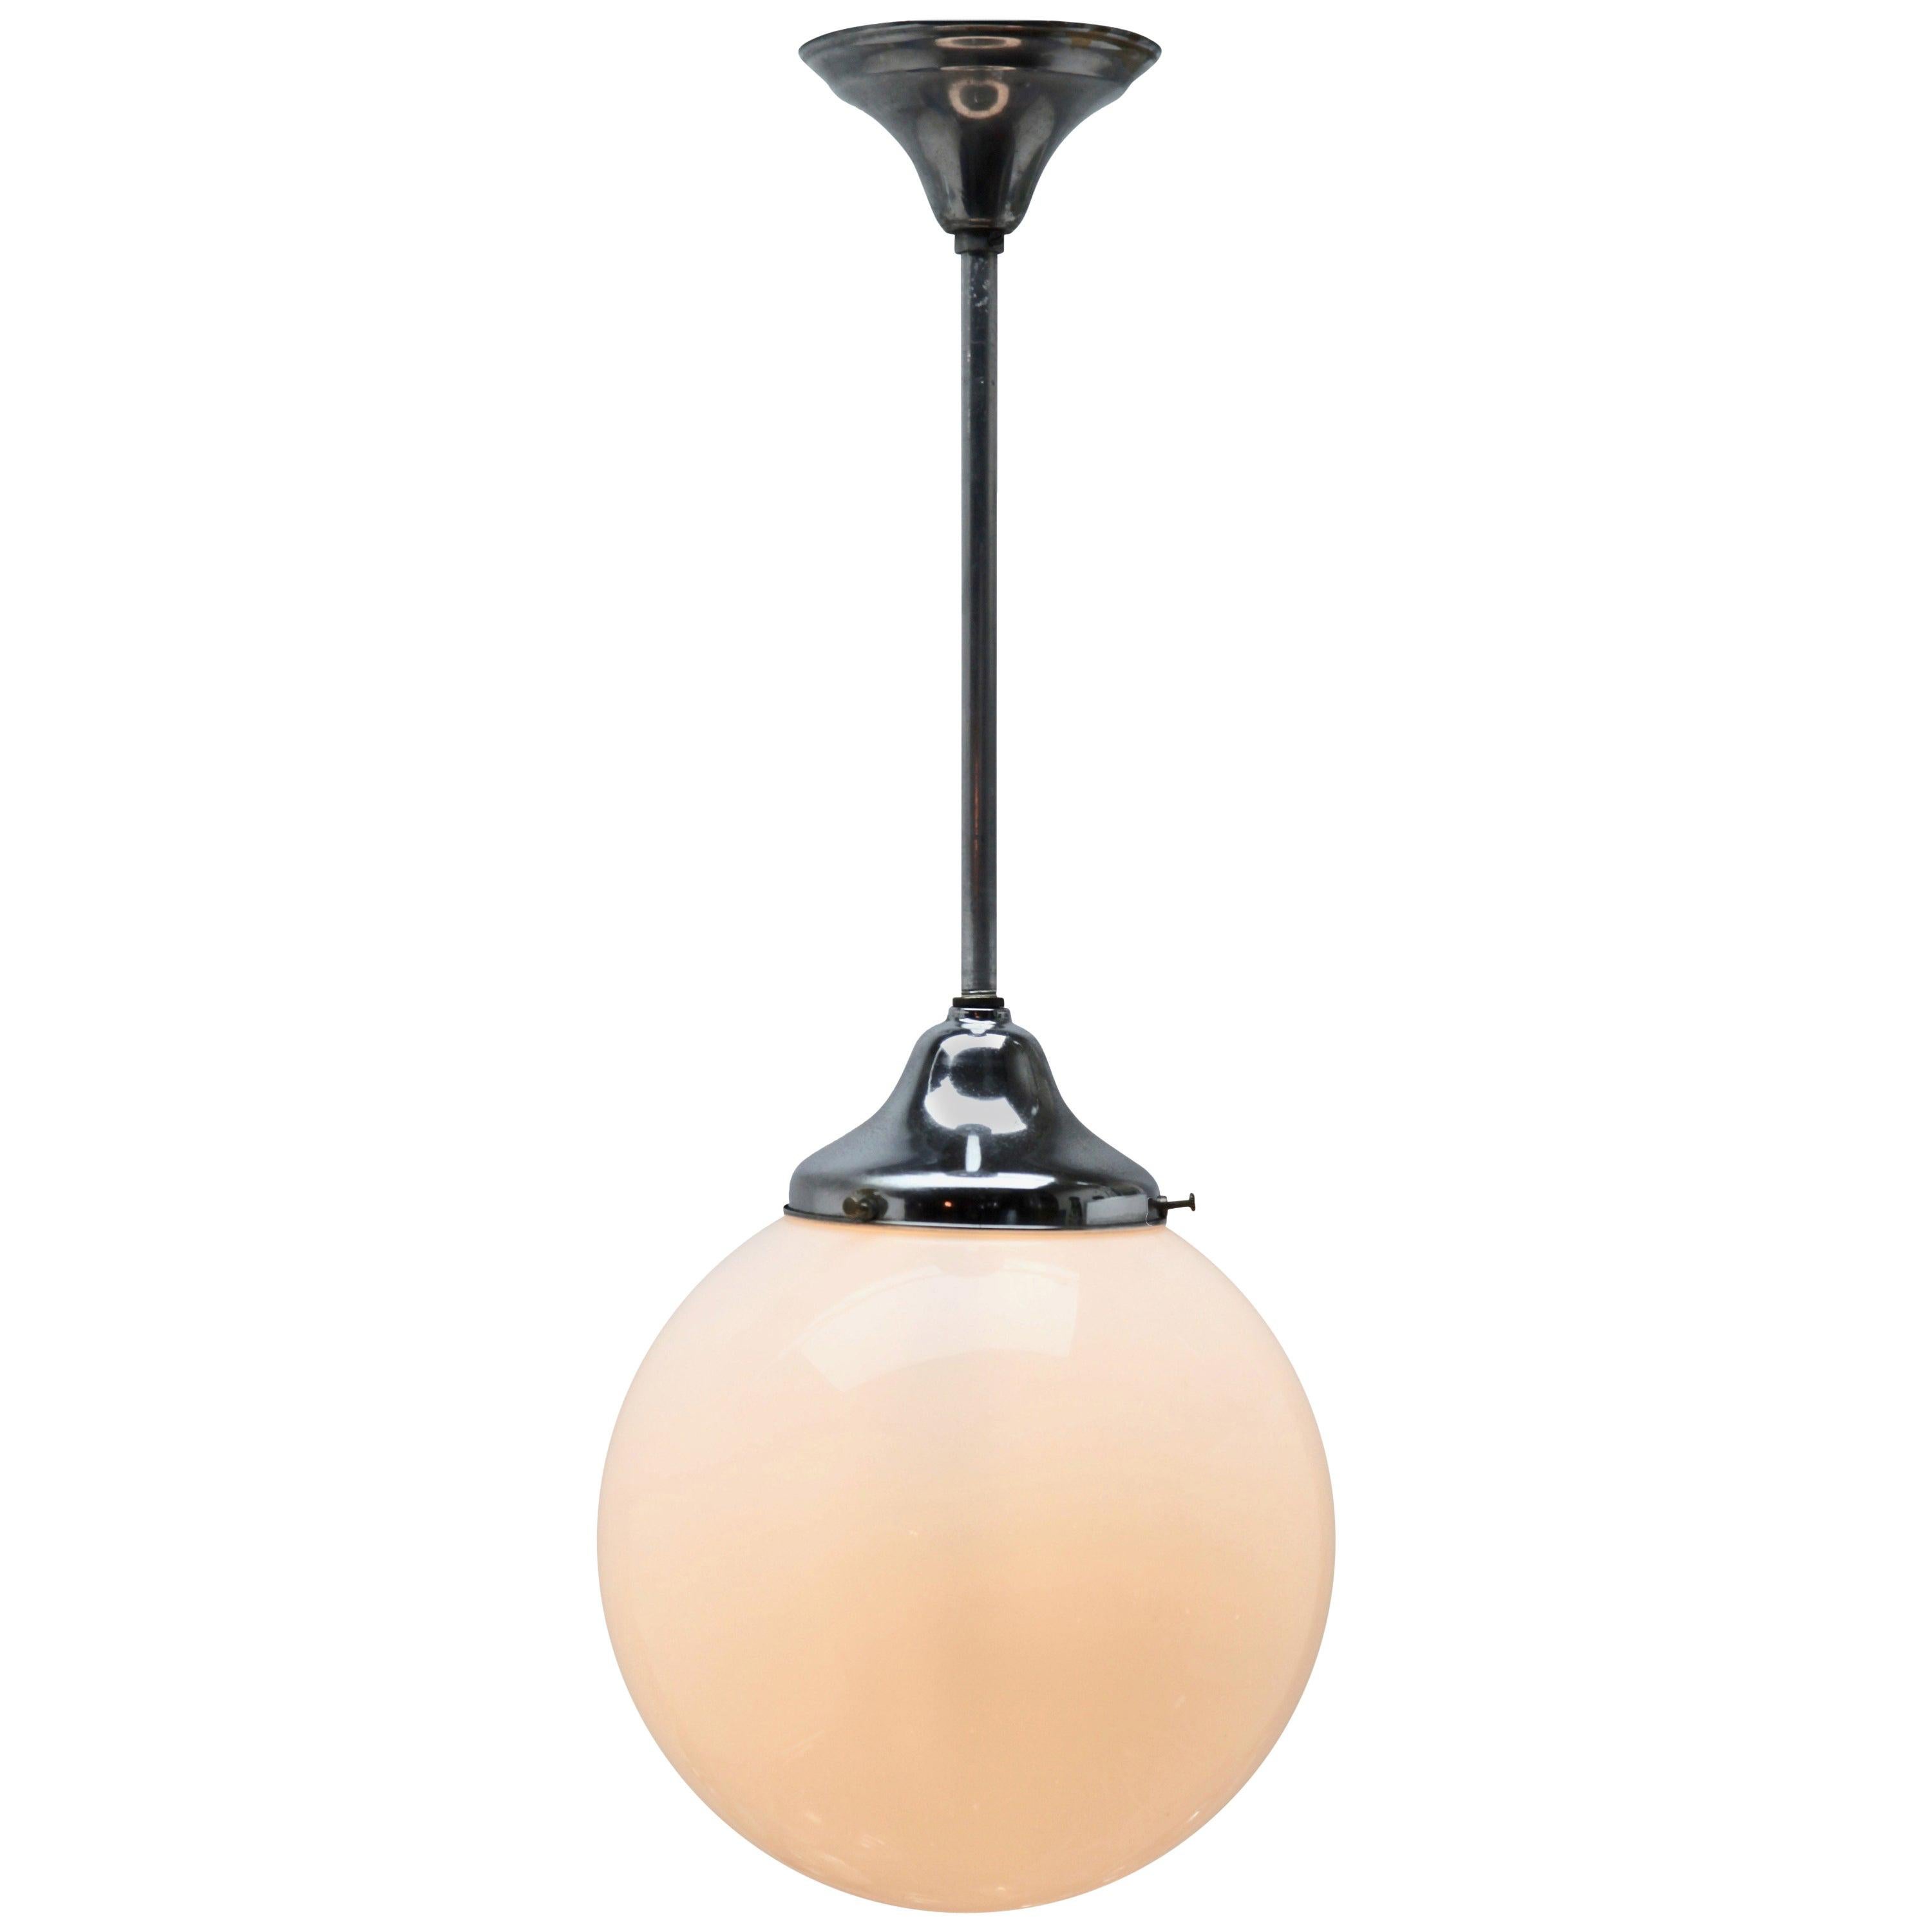 Phillips Pendant Stem Lamp with a Globular Opaline Shade, 1930s, Netherlands For Sale